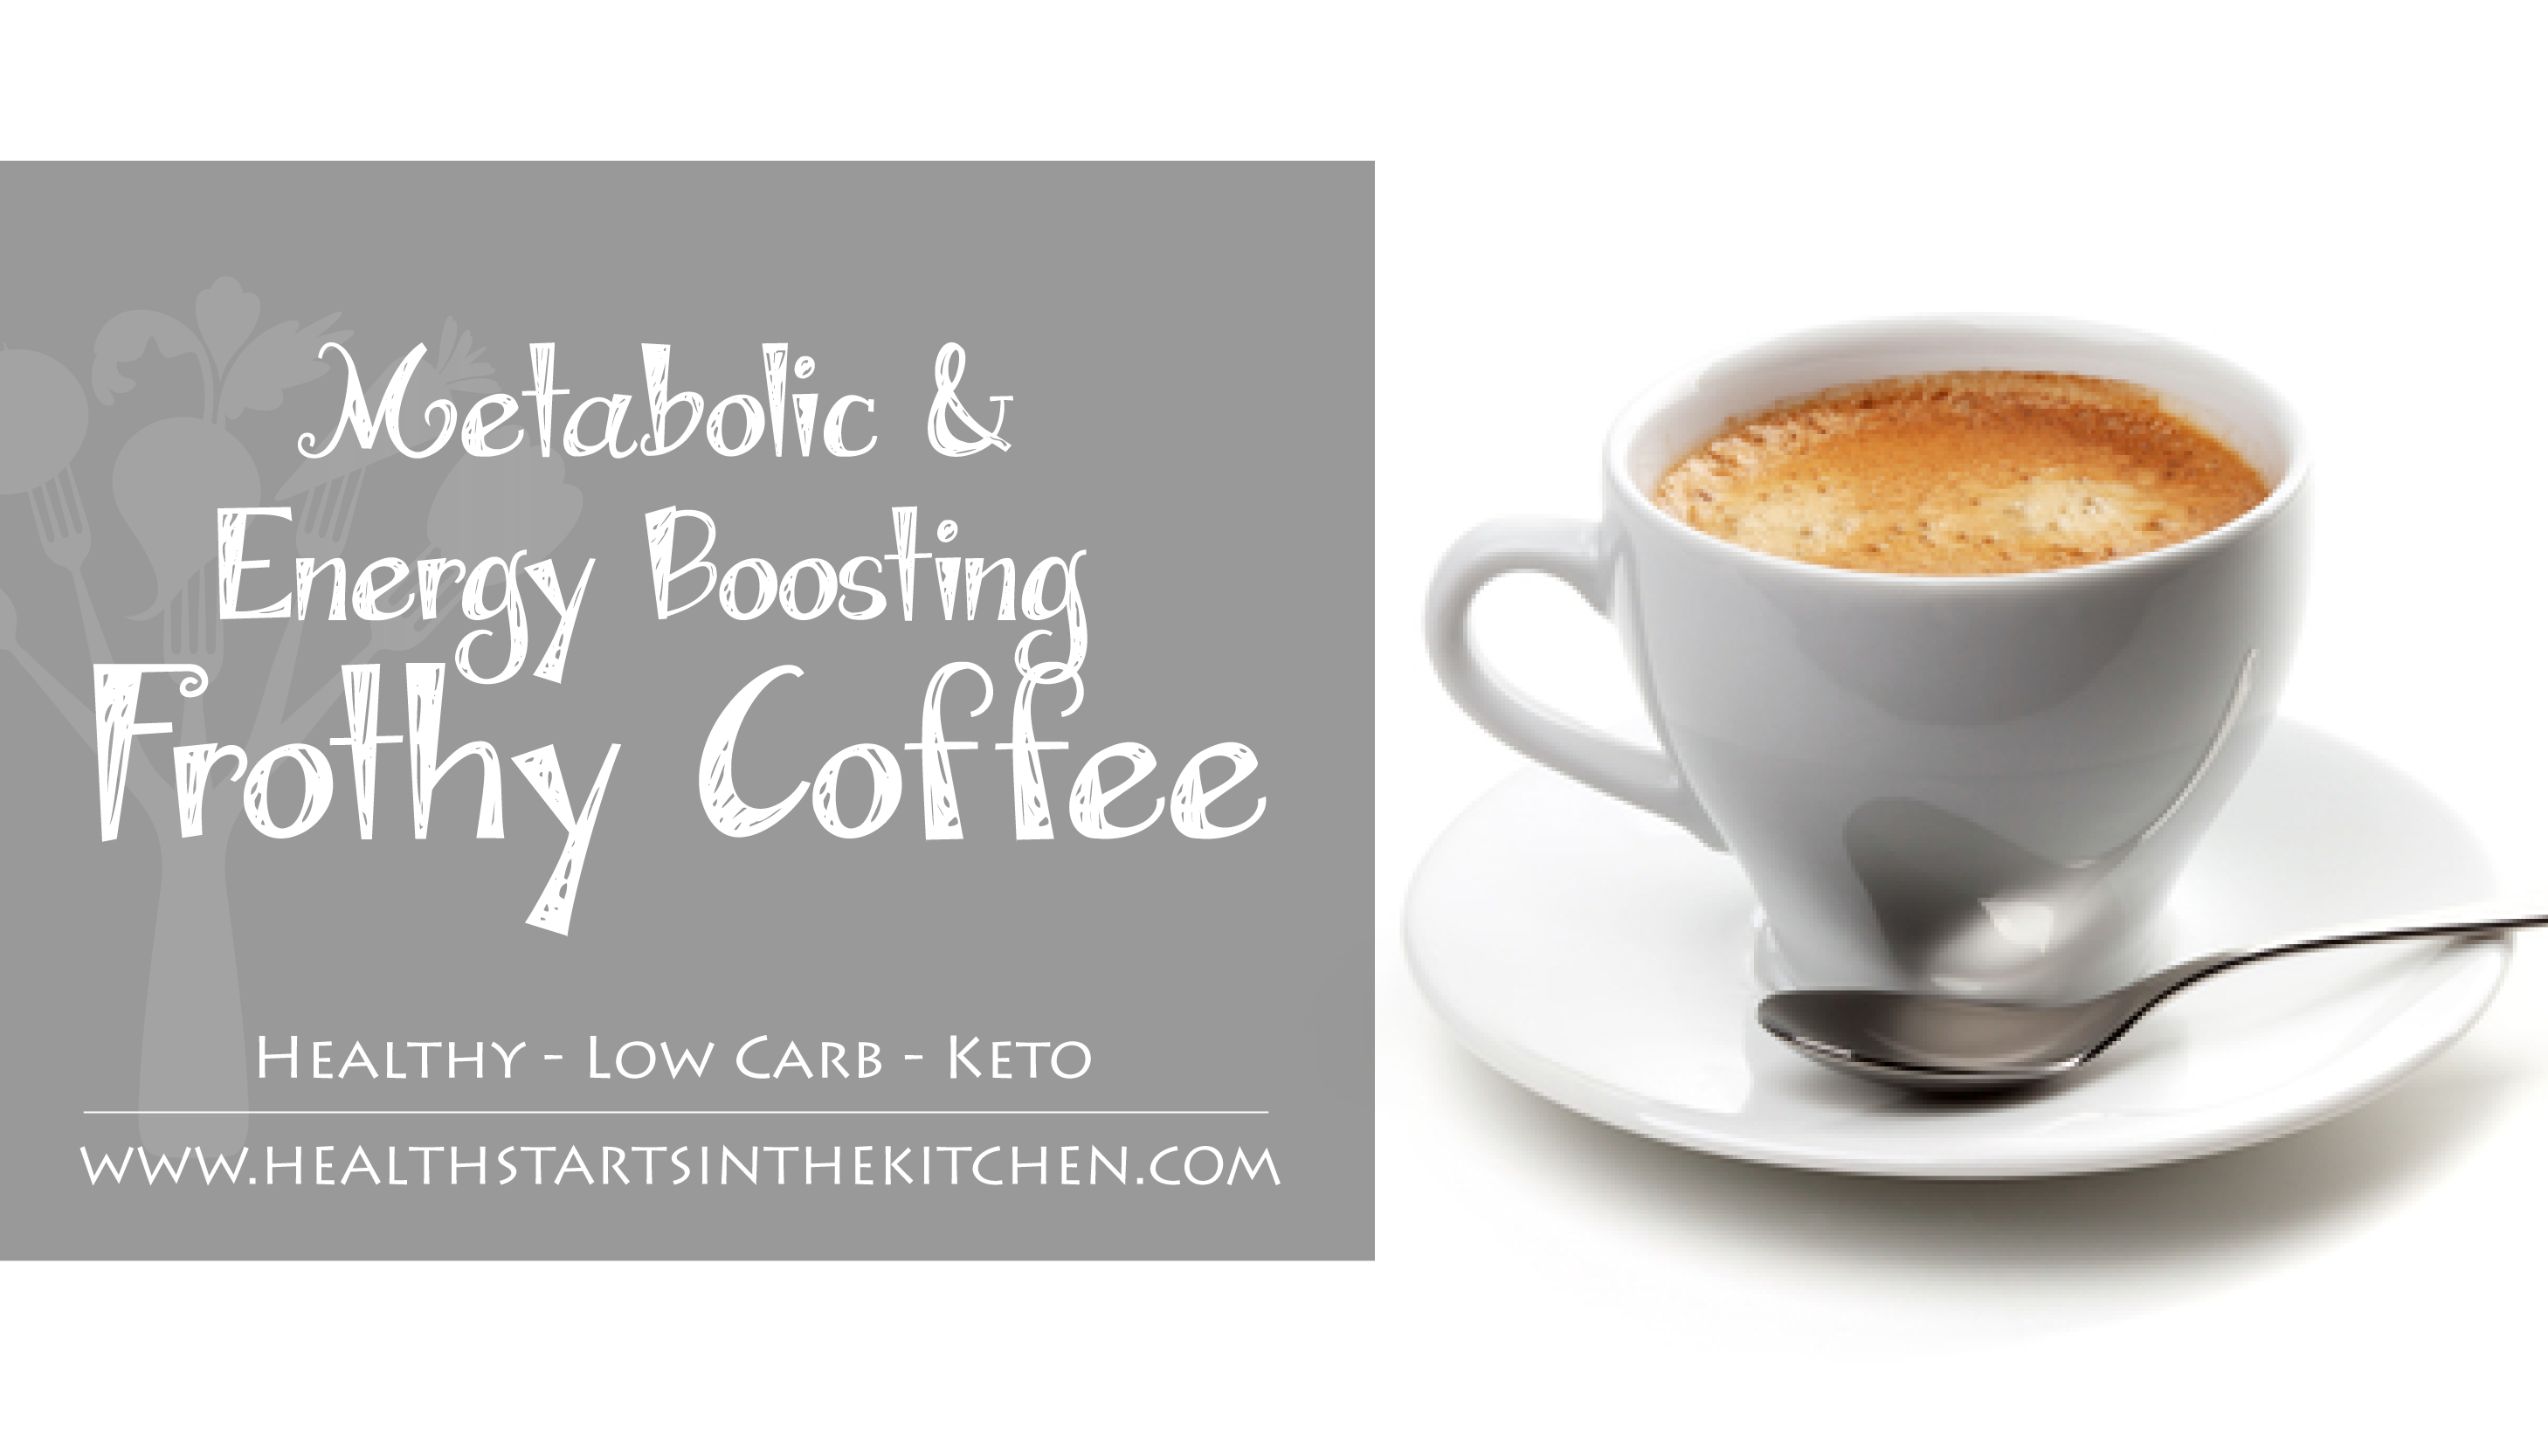 Metabolic & Energy Boosting Frothy Coffee - Health Starts in the Kitchen